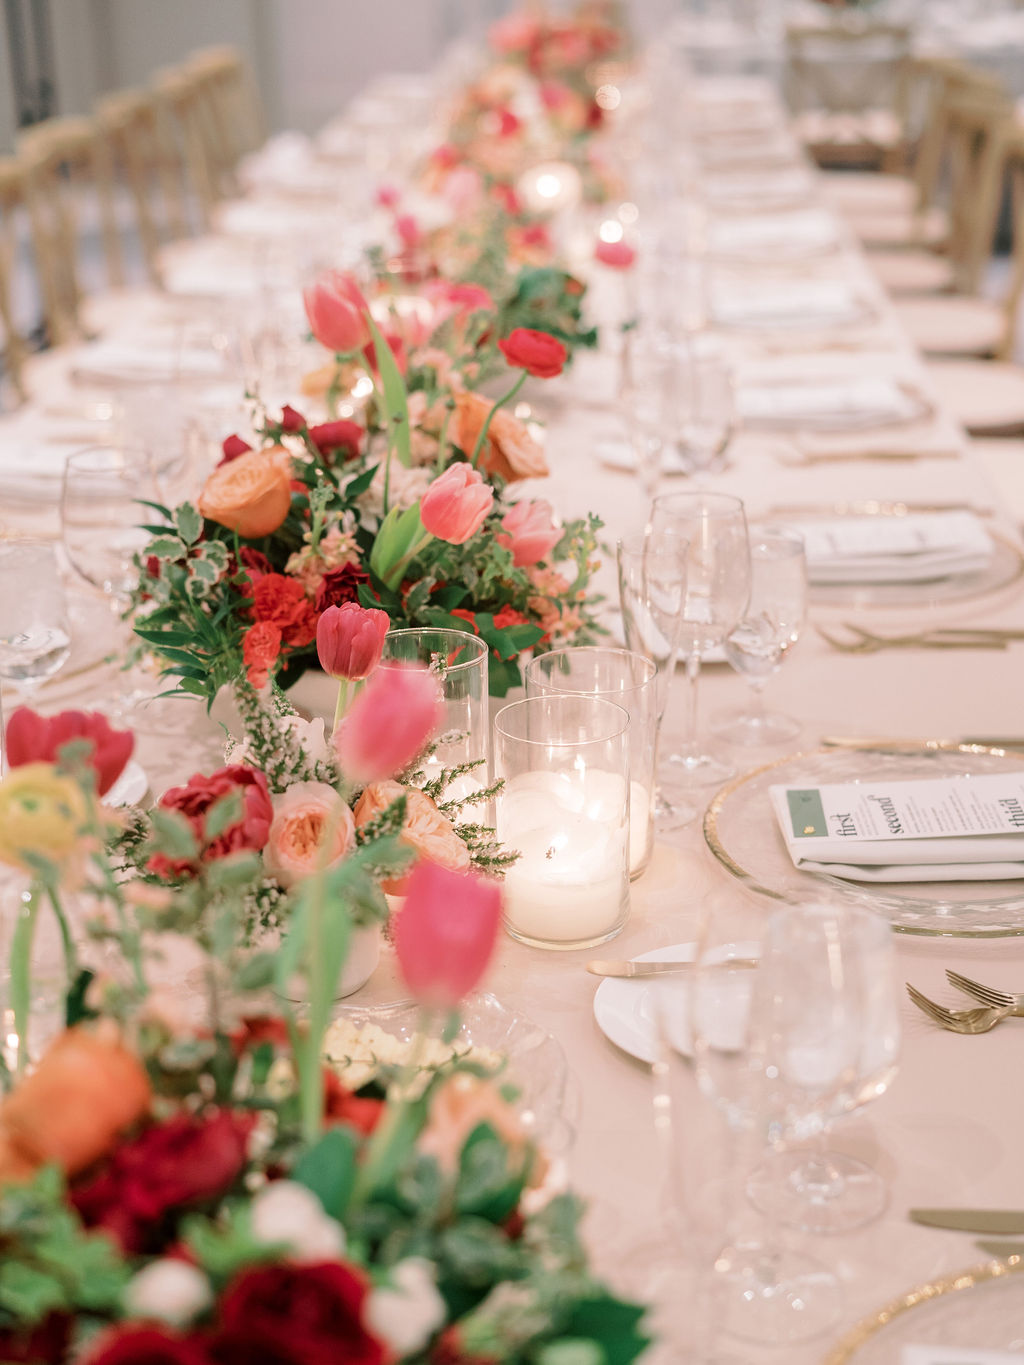 Long table at wedding reception with varied floral centerpieces down center.